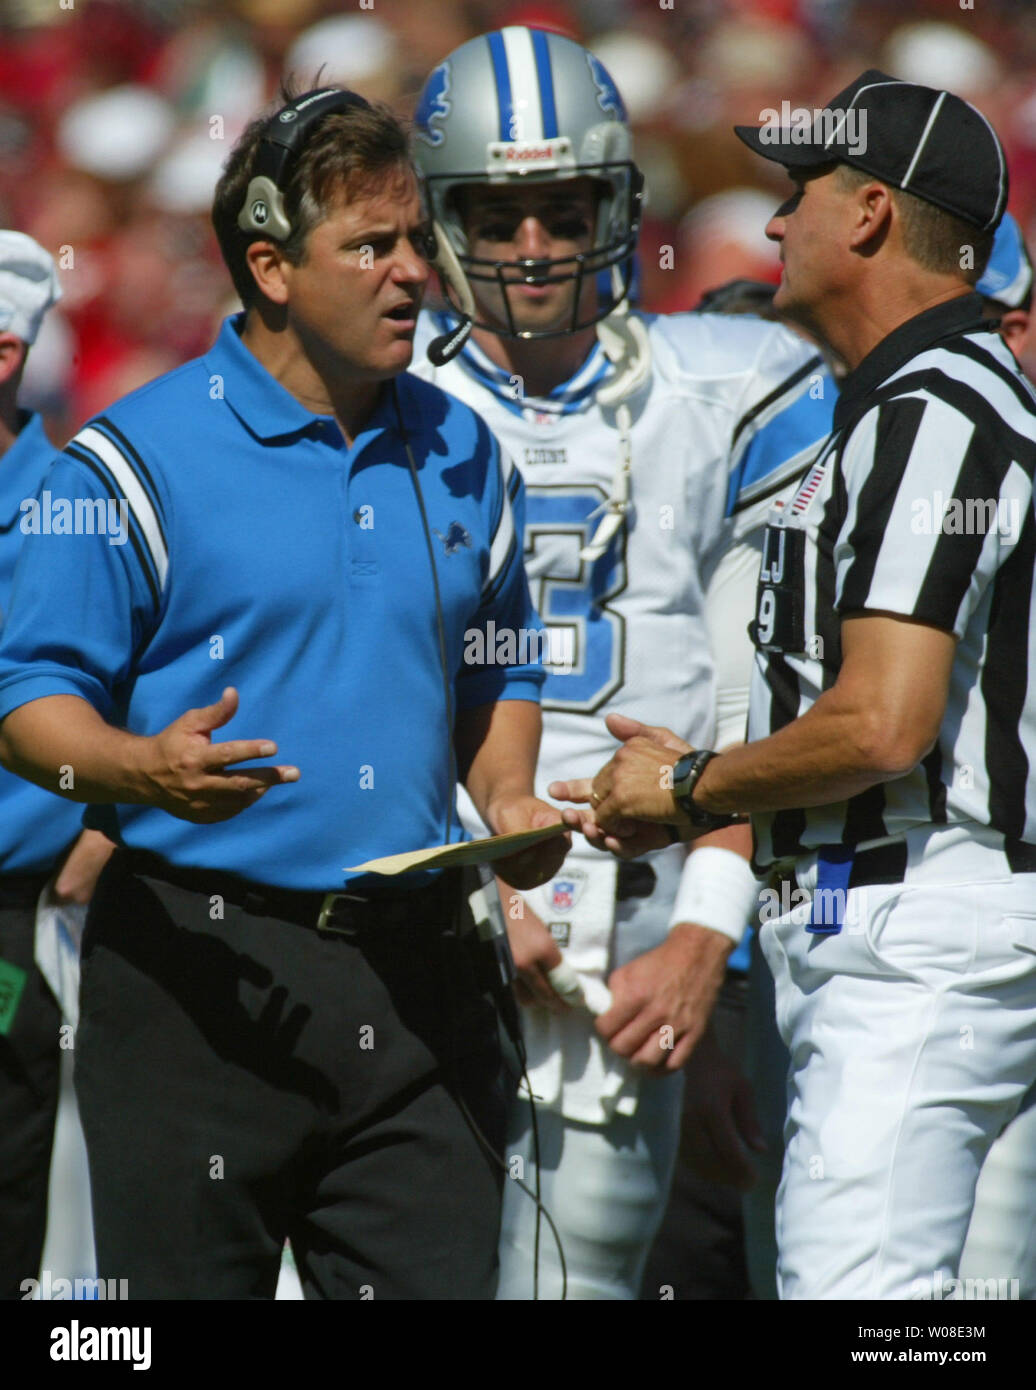 The Detroit Lions coach Steve Mariucci discusses a call with line judge Mark Perlman as QB Joey Harrington looks on in San Francisco,  CA, October 5, 2003. The 49ers defeated the Lions 24-17.  (UPI/TERRY SCHMITT) Stock Photo